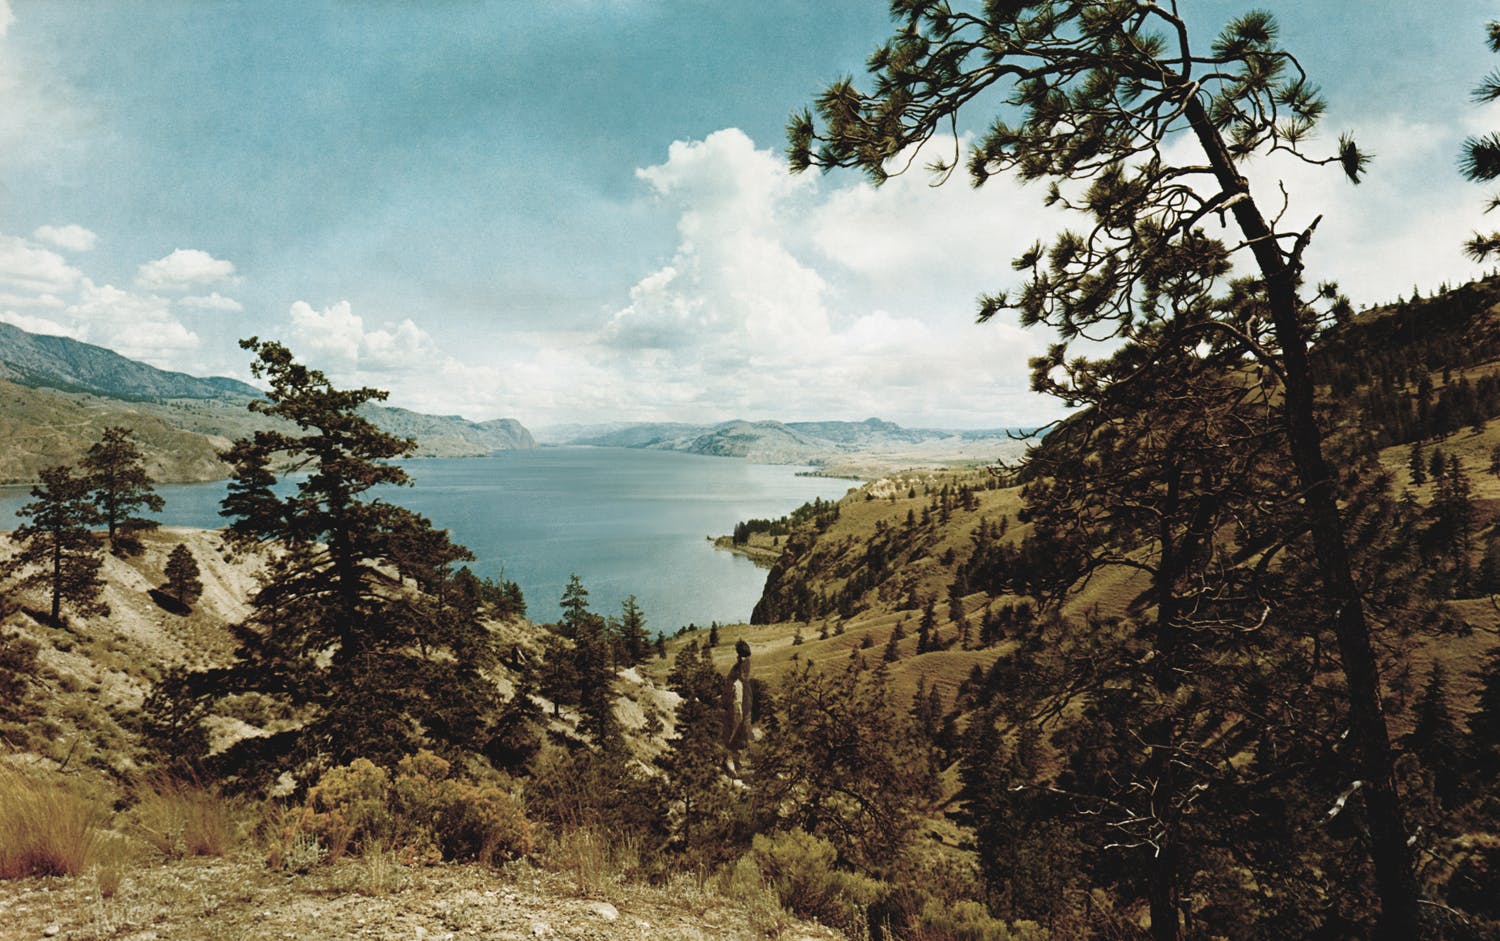 An image of a hilly, rocky landscape dotted with evergreen trees surrounding a blue lake. 